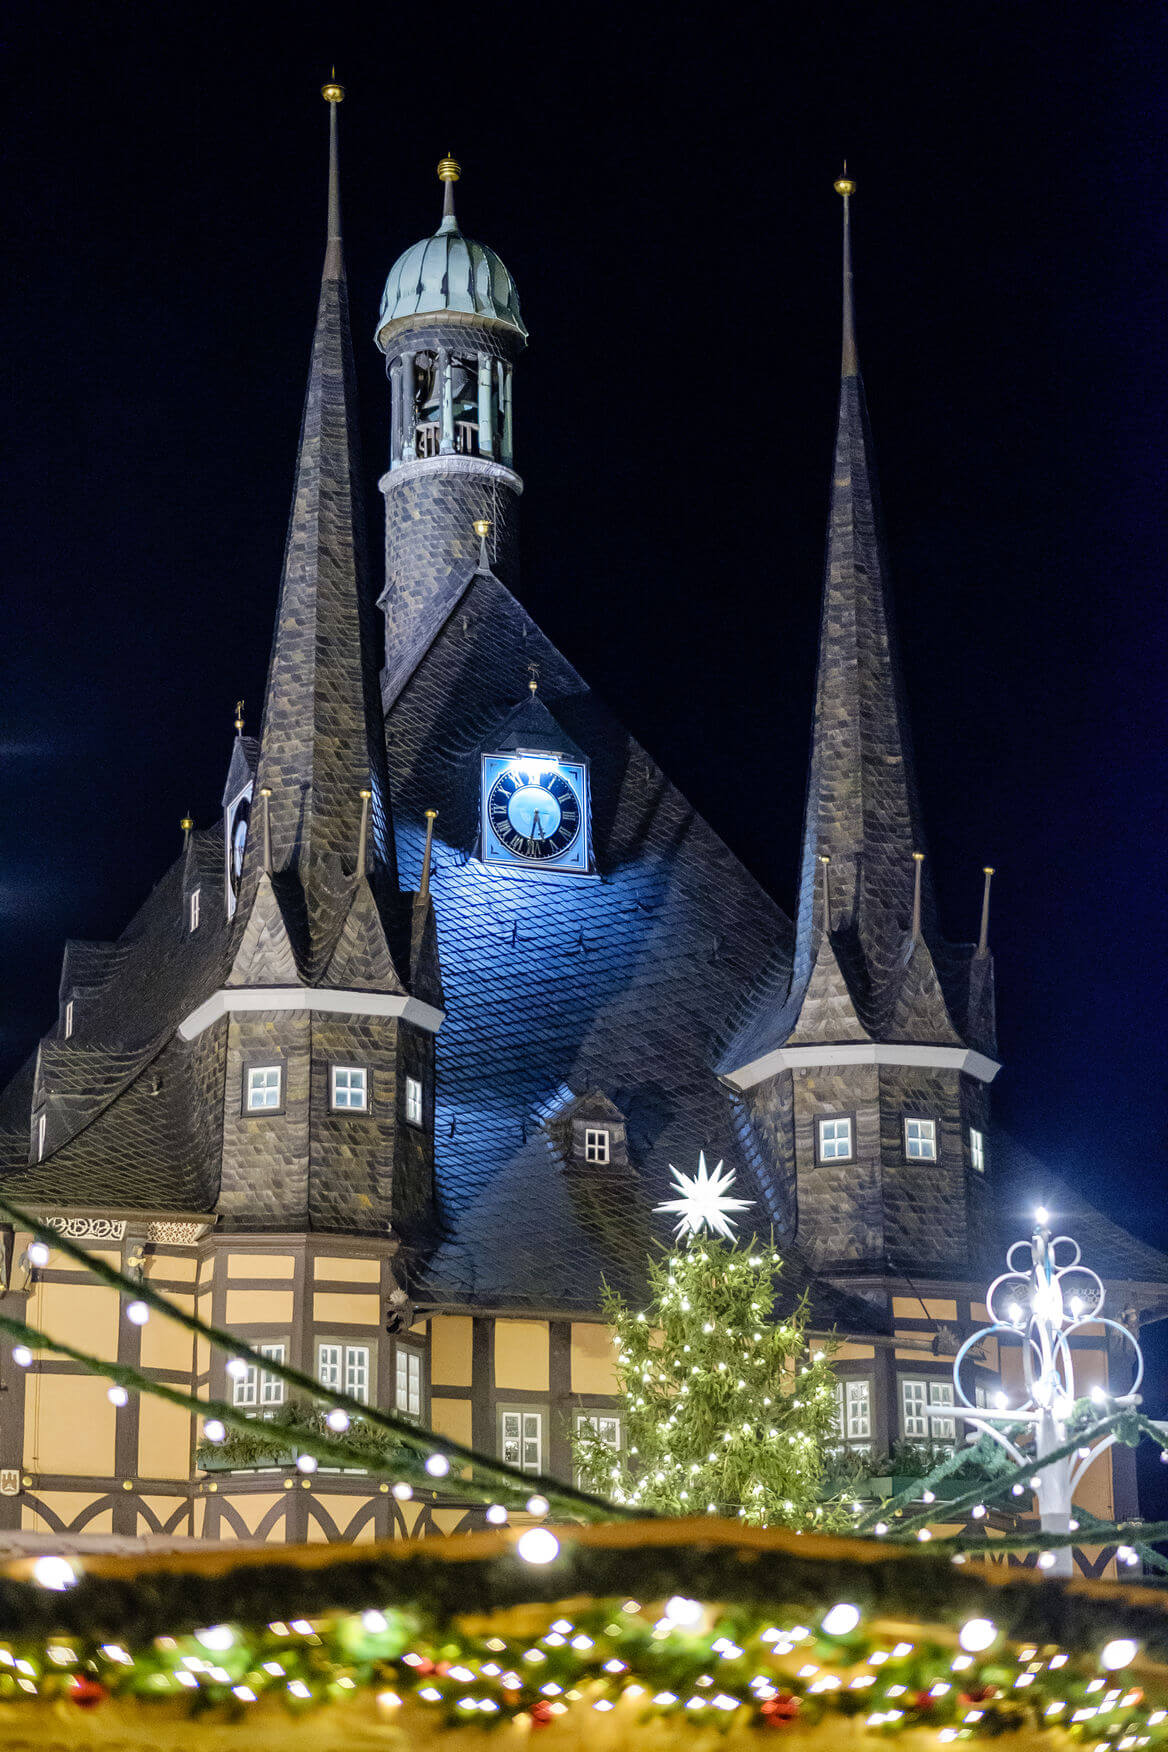 Christmas Market and Town Hall of Wernigerode, Germany